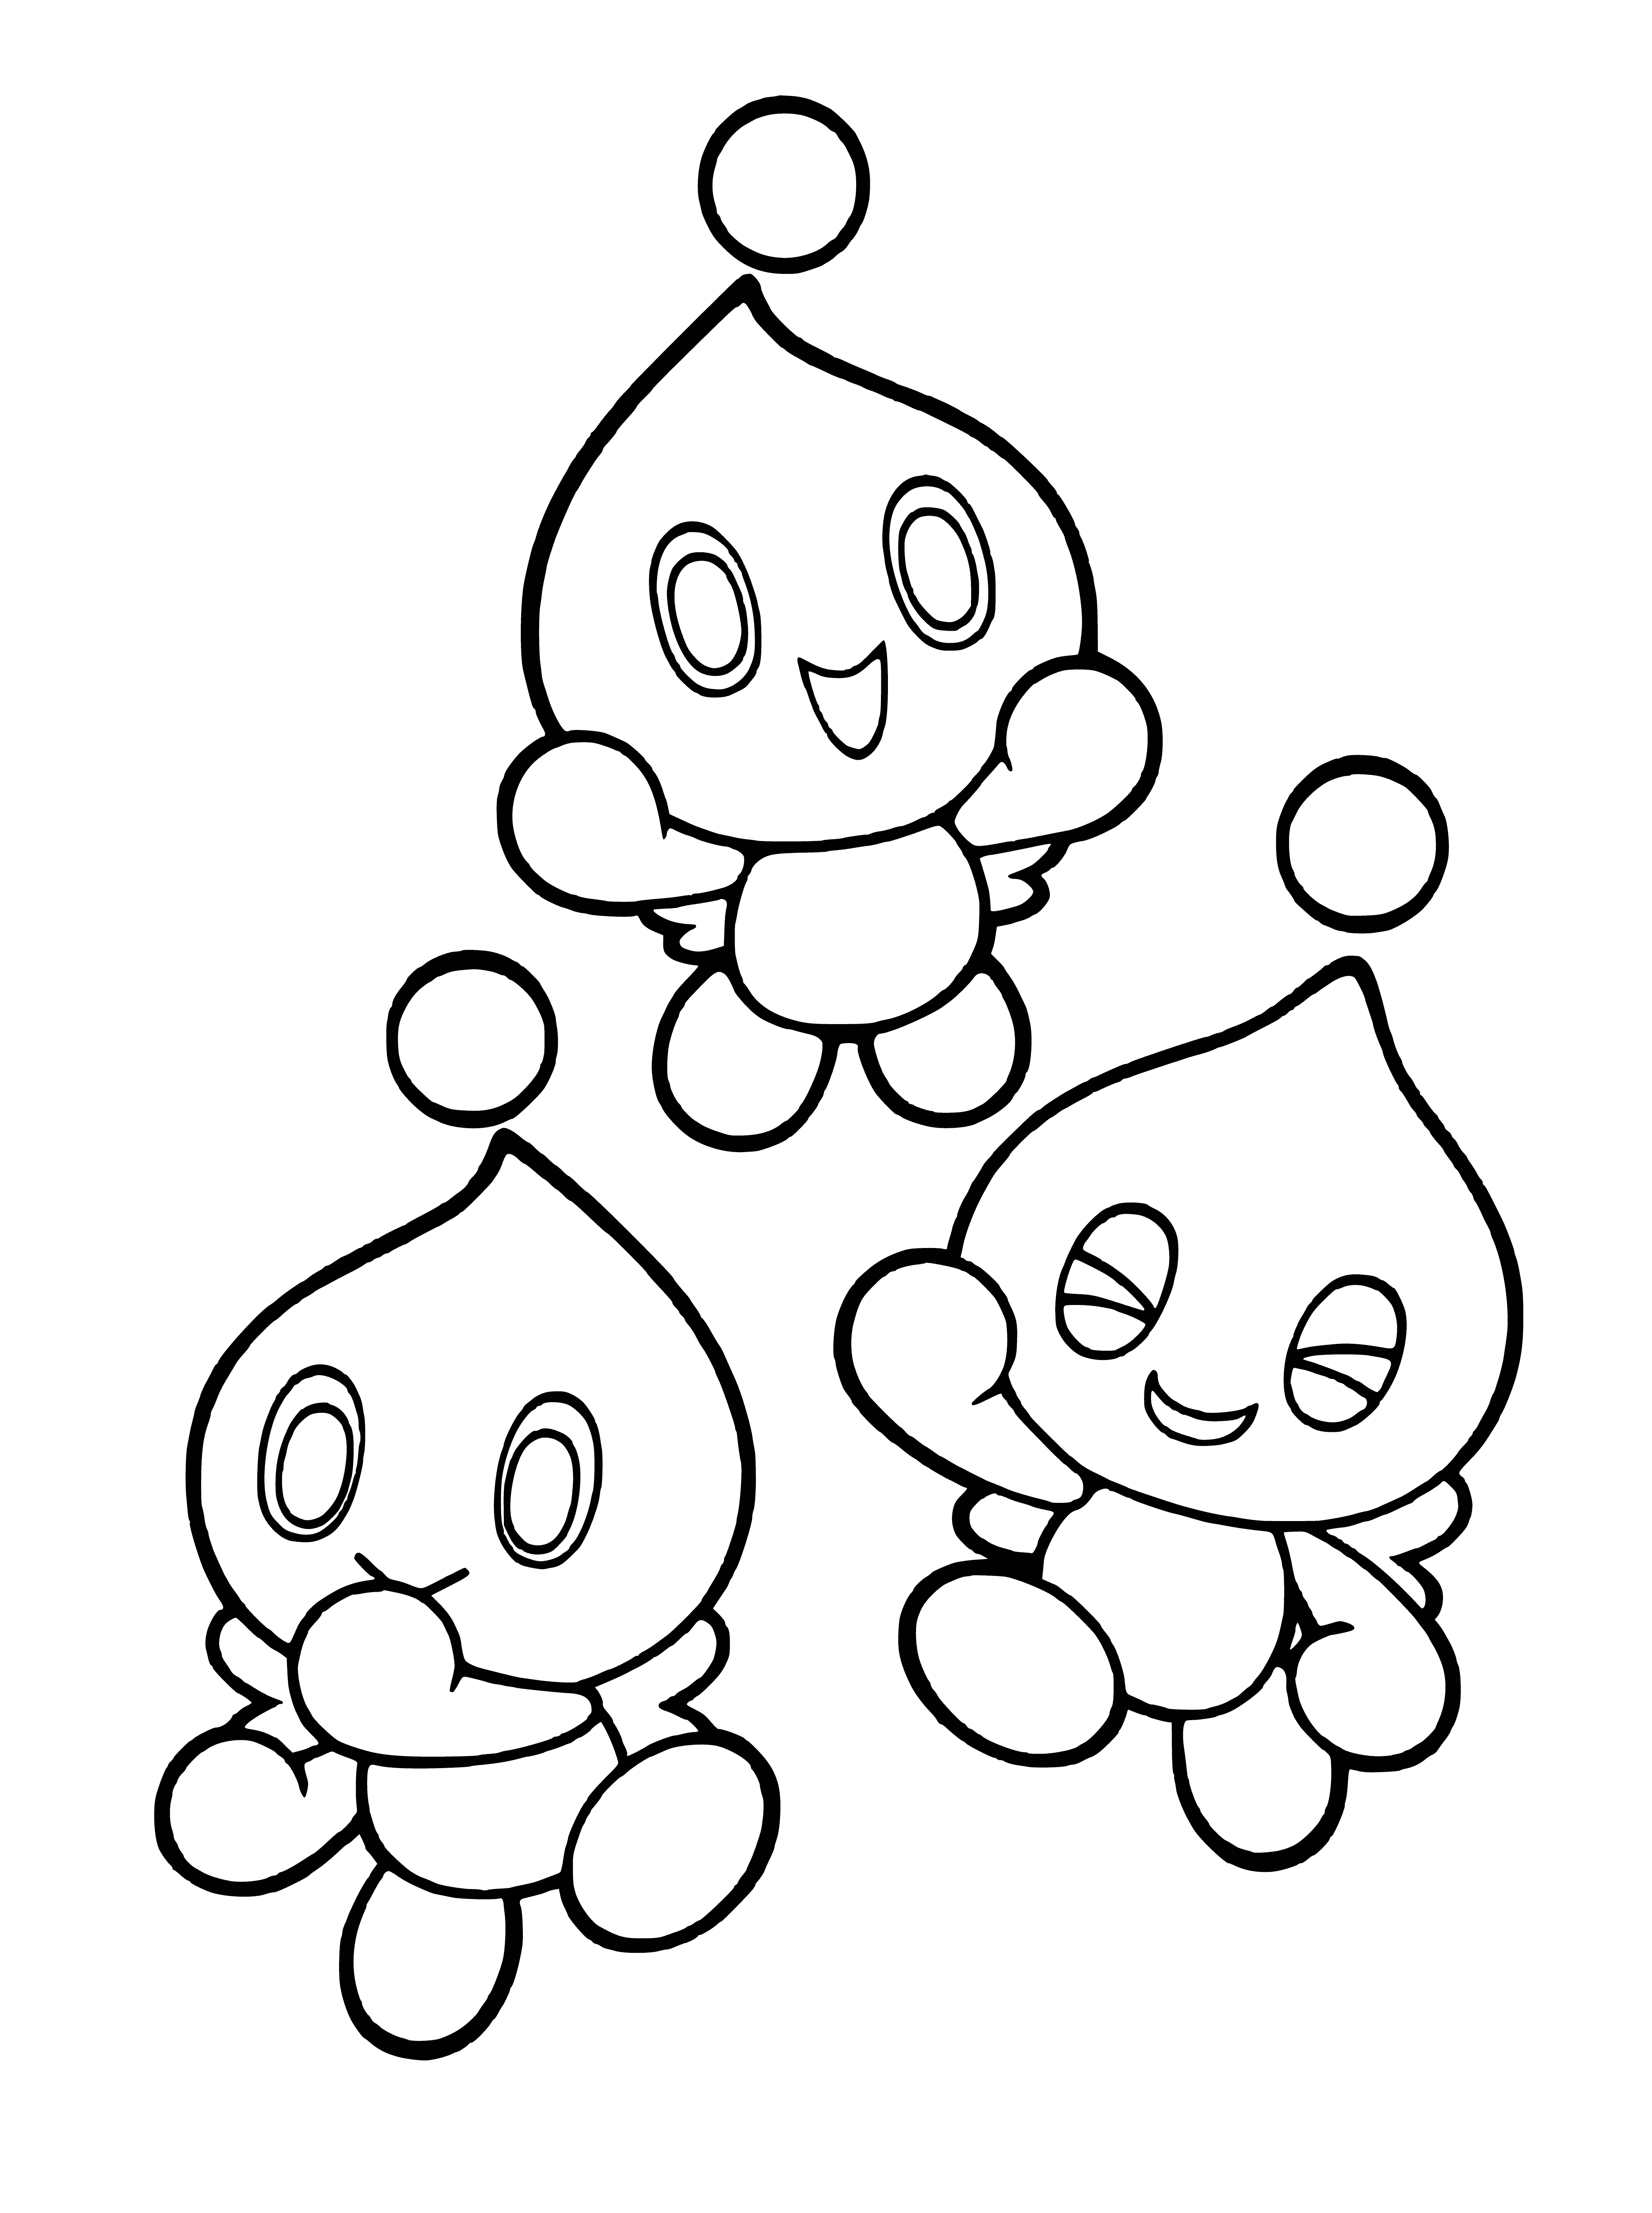 Funny chao coloring page